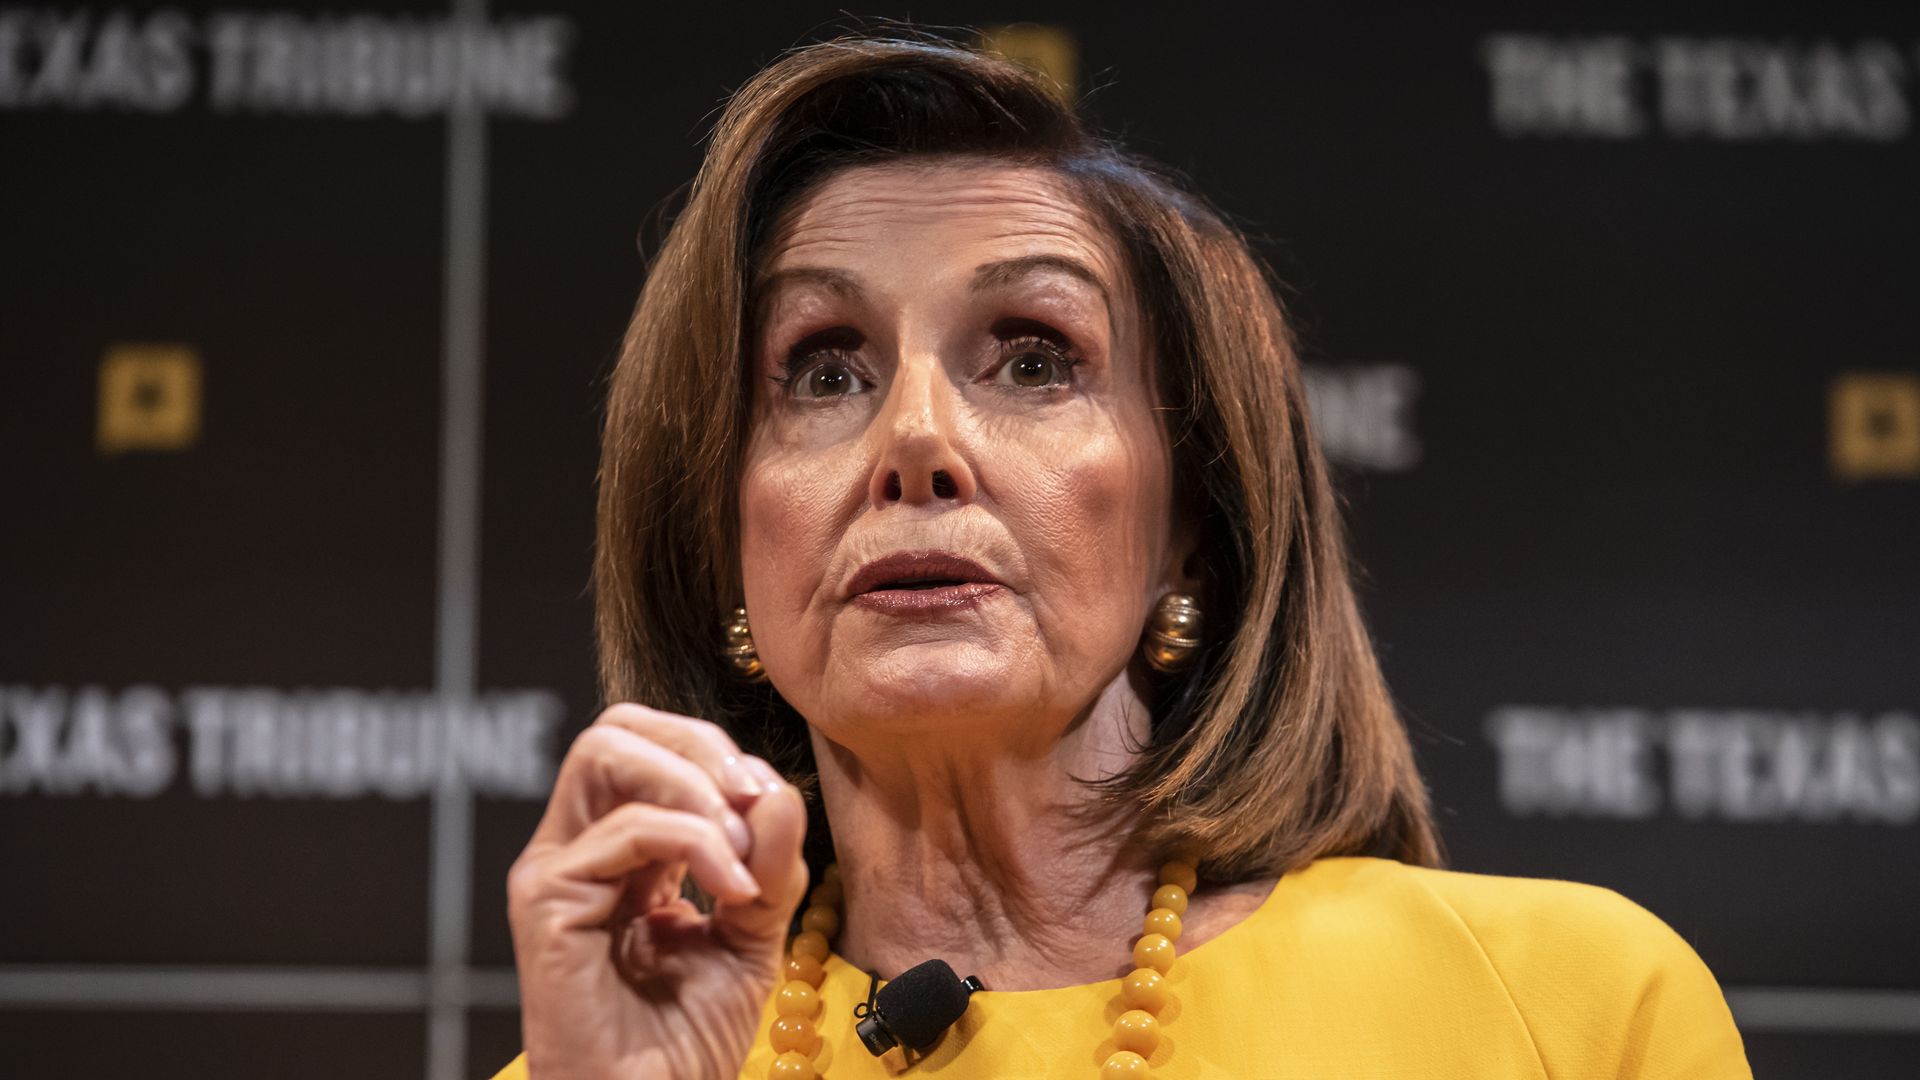 peaker of the House of Representatives, Nancy Pelosi speaks with Texas Tribune CEO, Evan Smith during a panel at The Texas Tribune Festival on September 28, 2019 in Austin, Texas. 